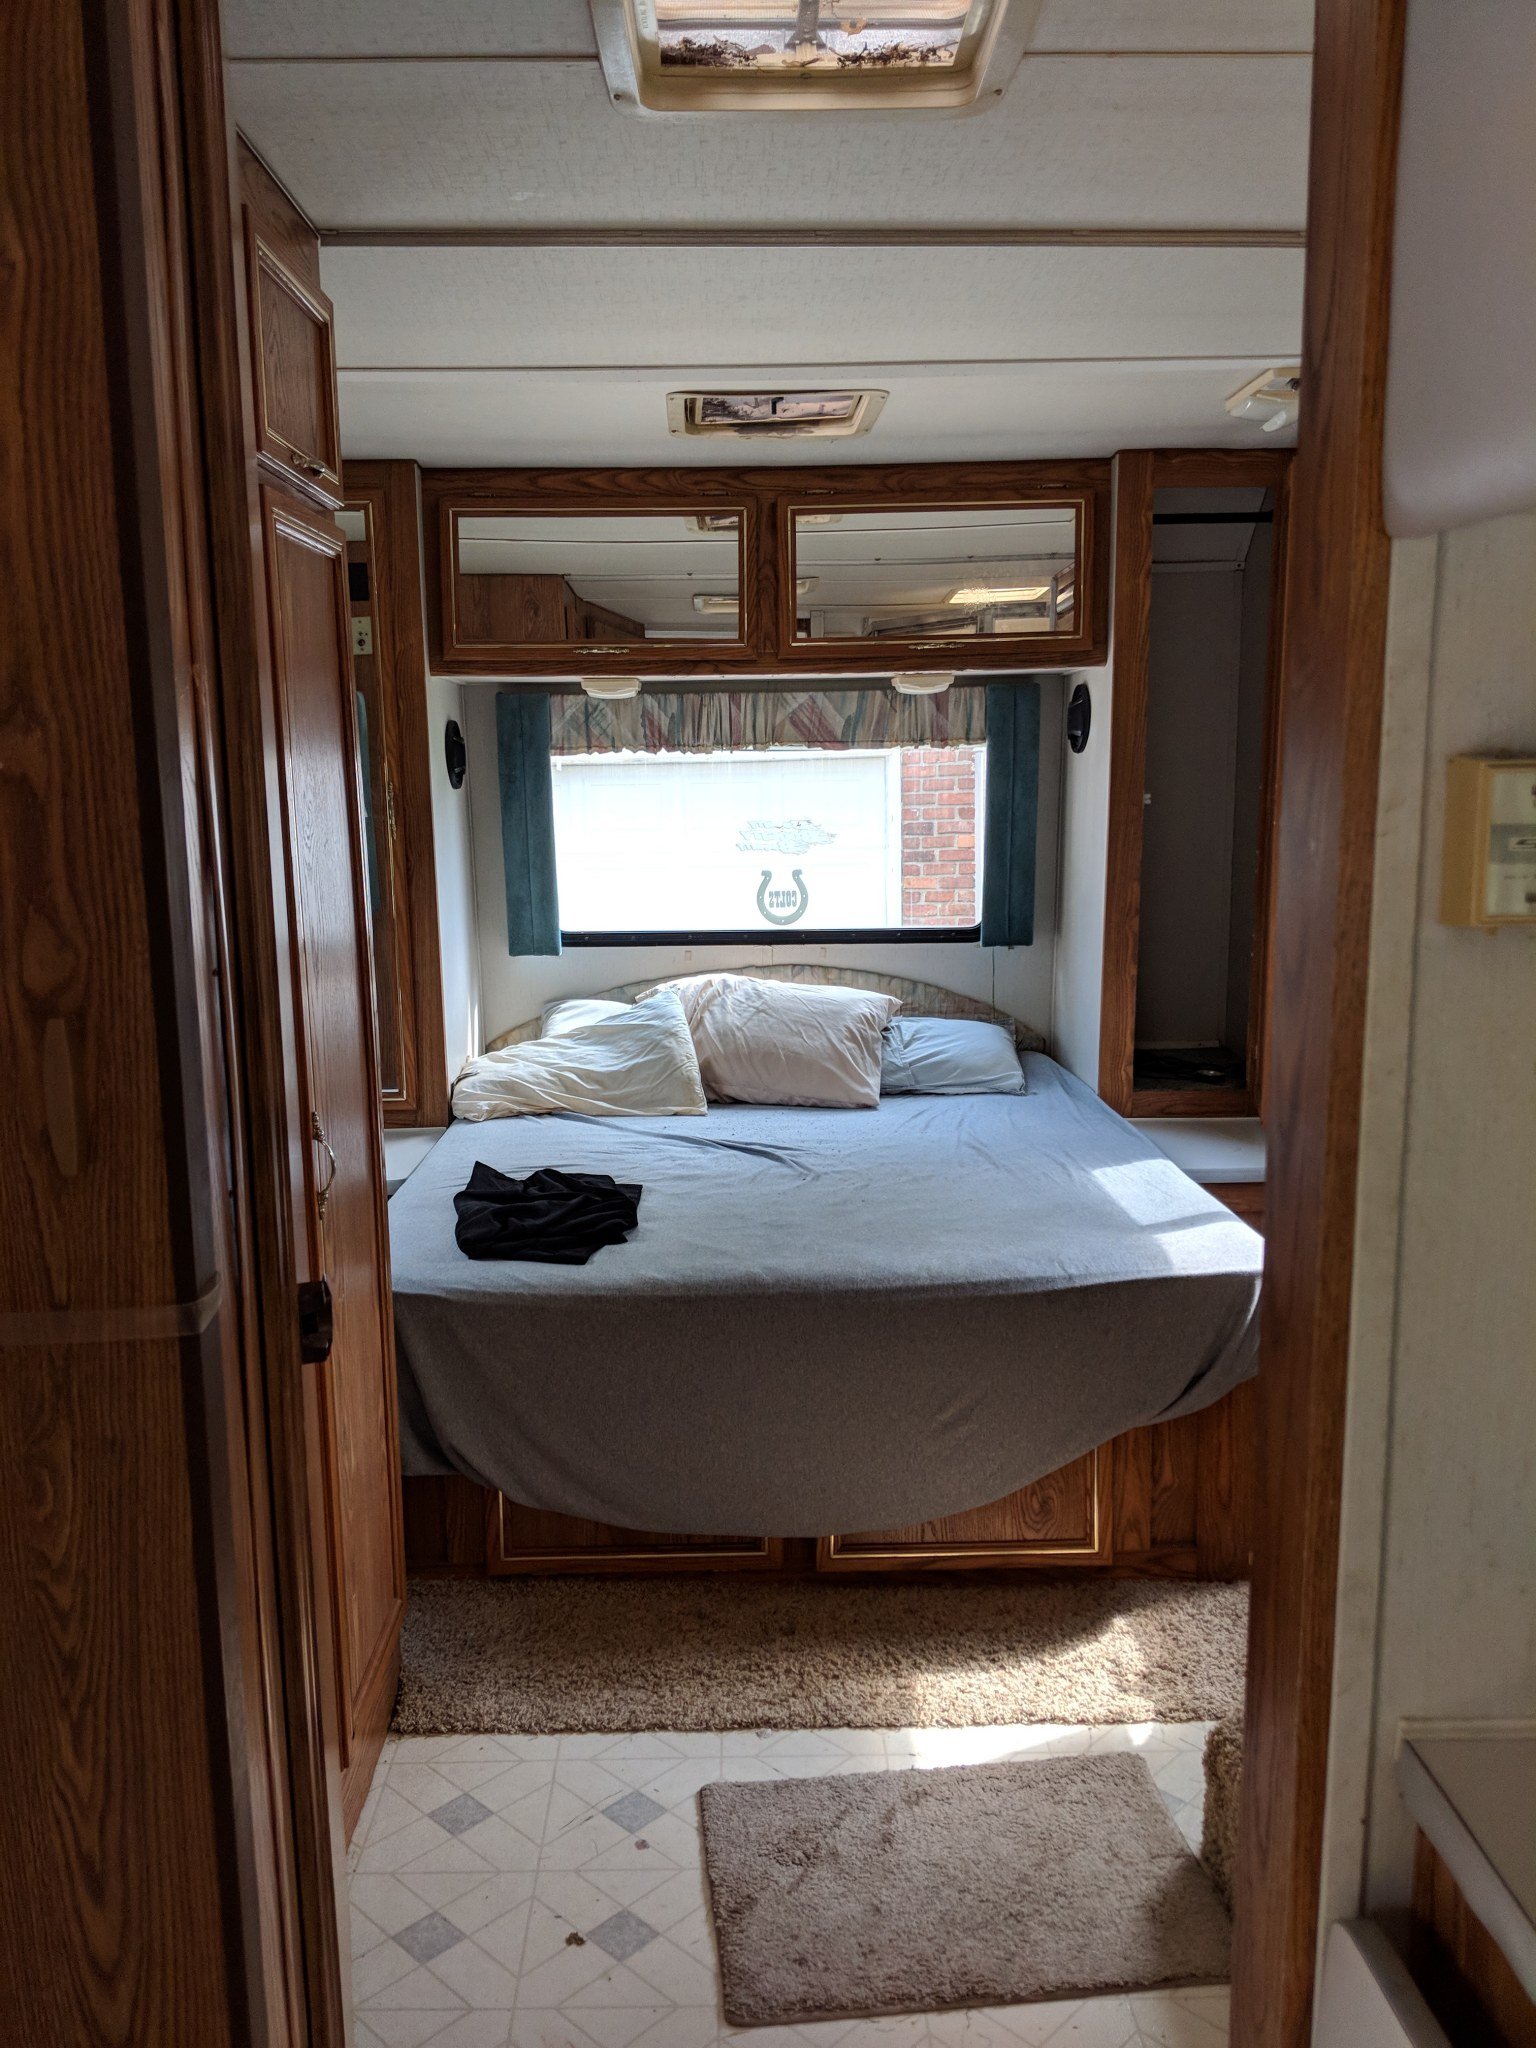 Our 90's RV Renovation All Things with Purpose Sarah Lemp 9